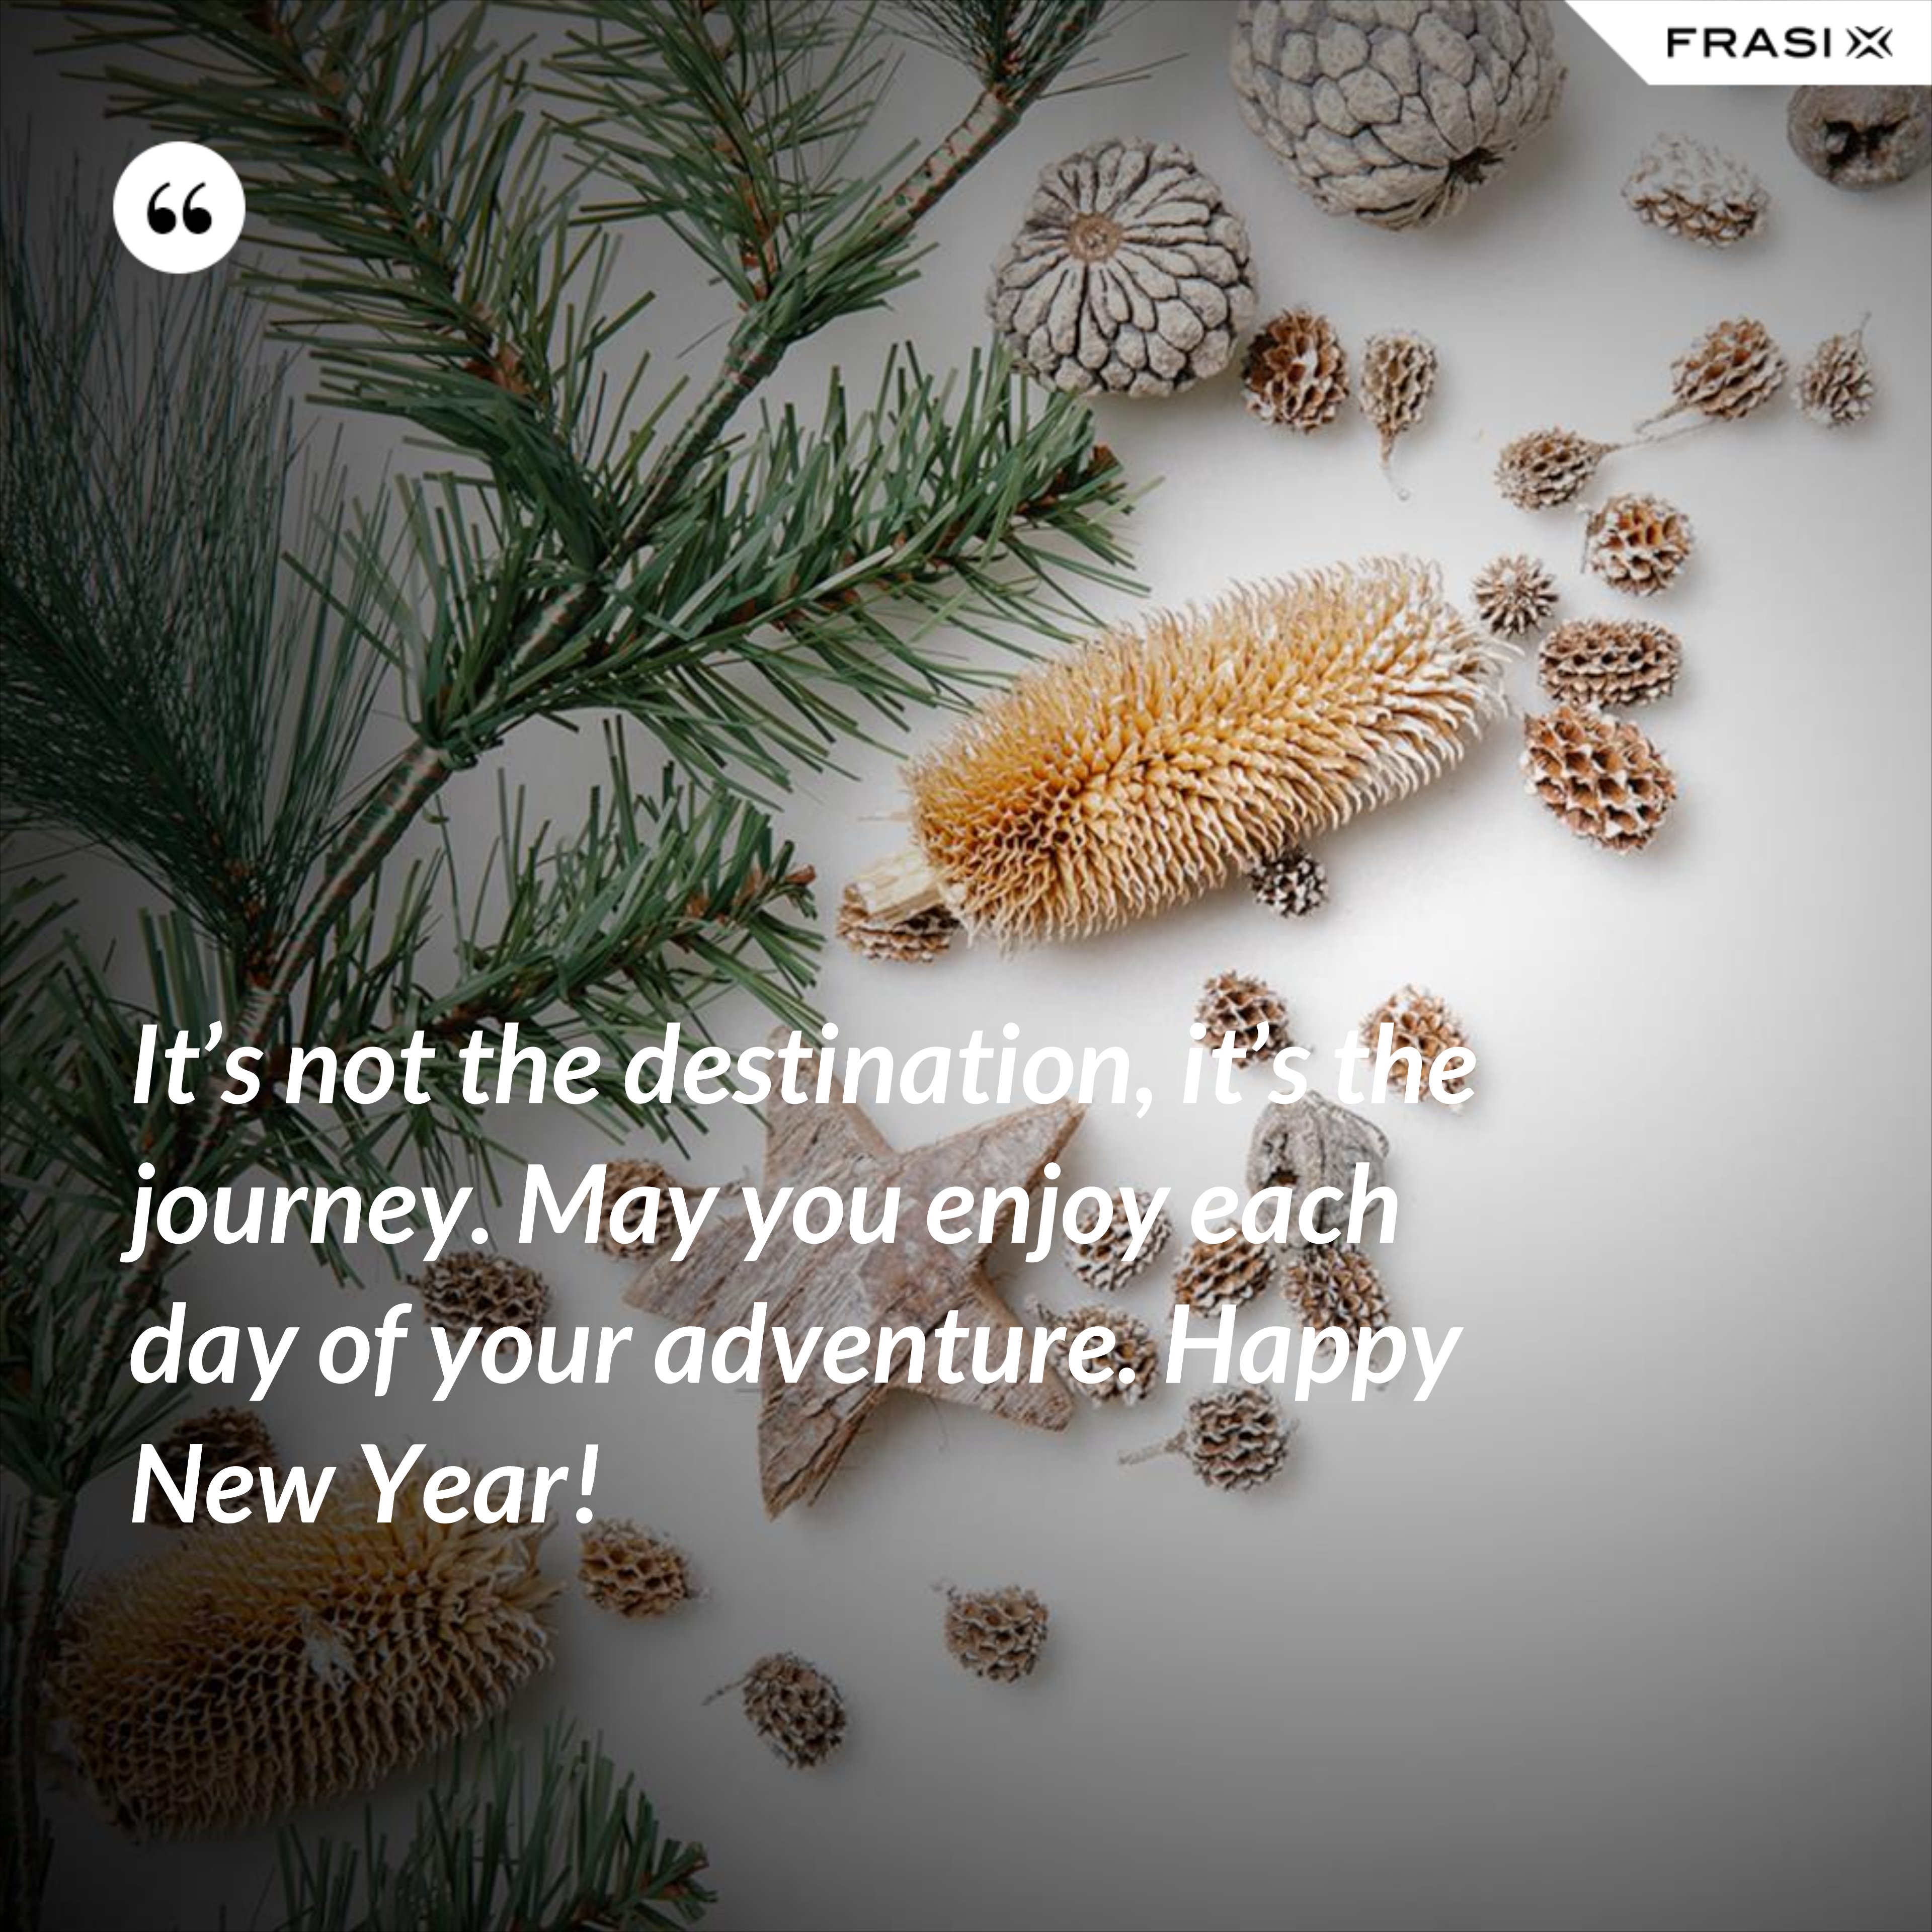 It’s not the destination, it’s the journey. May you enjoy each day of your adventure. Happy New Year! - Anonimo